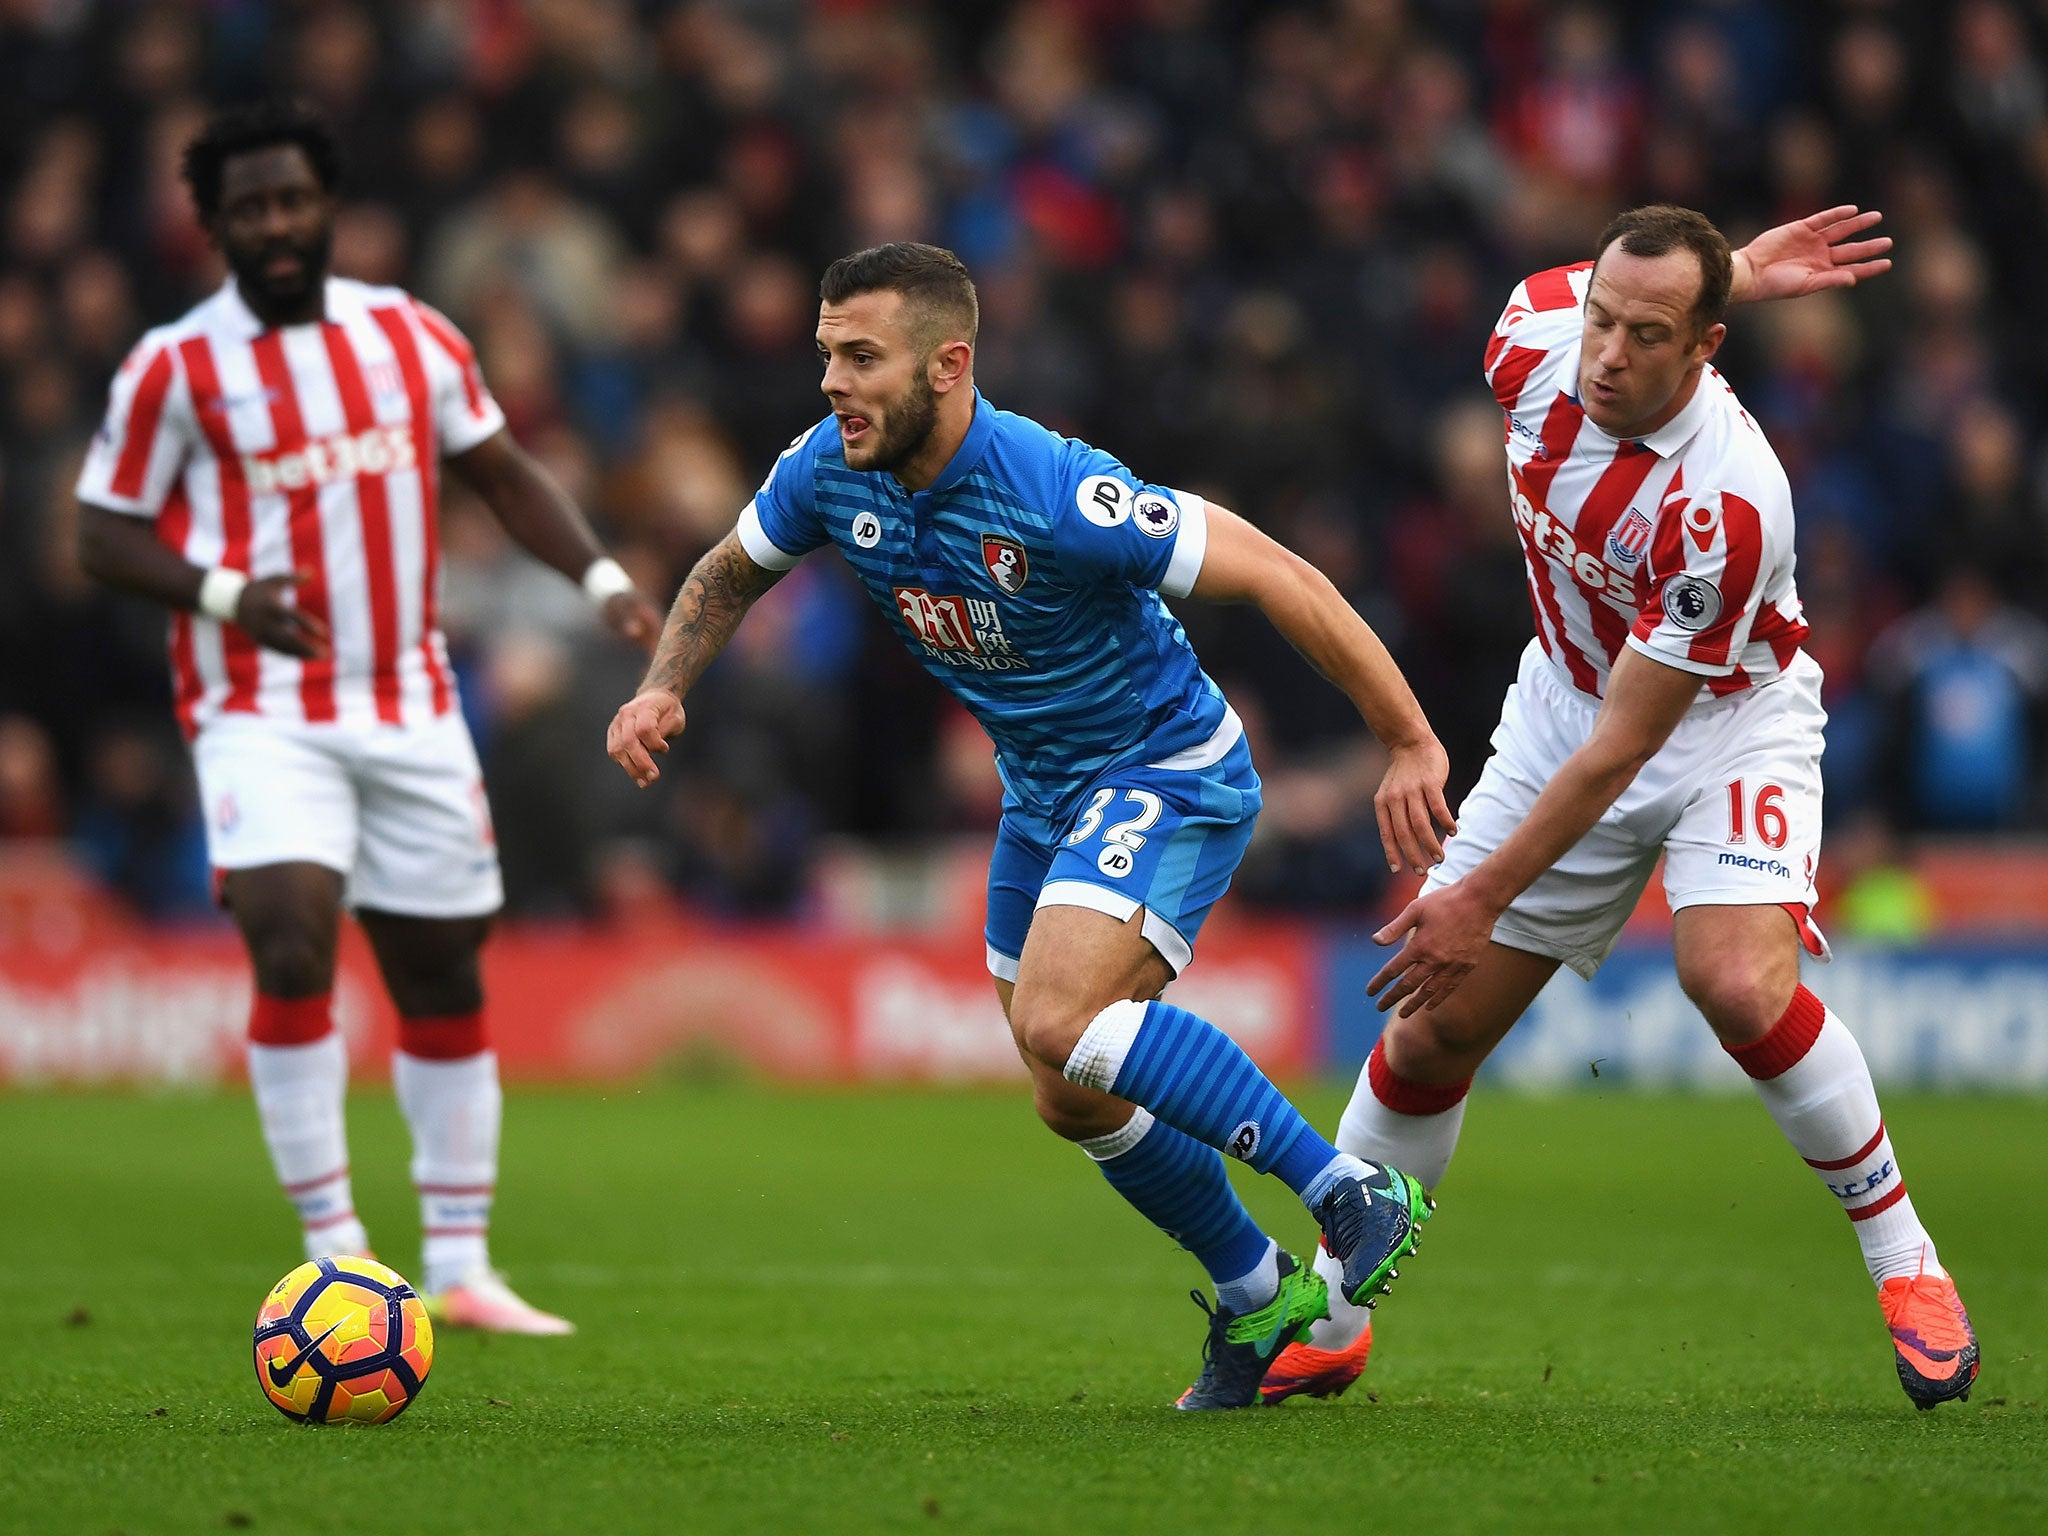 Wilshere completed his third 90-minute Premier League game of the season against Stoke at the weekend